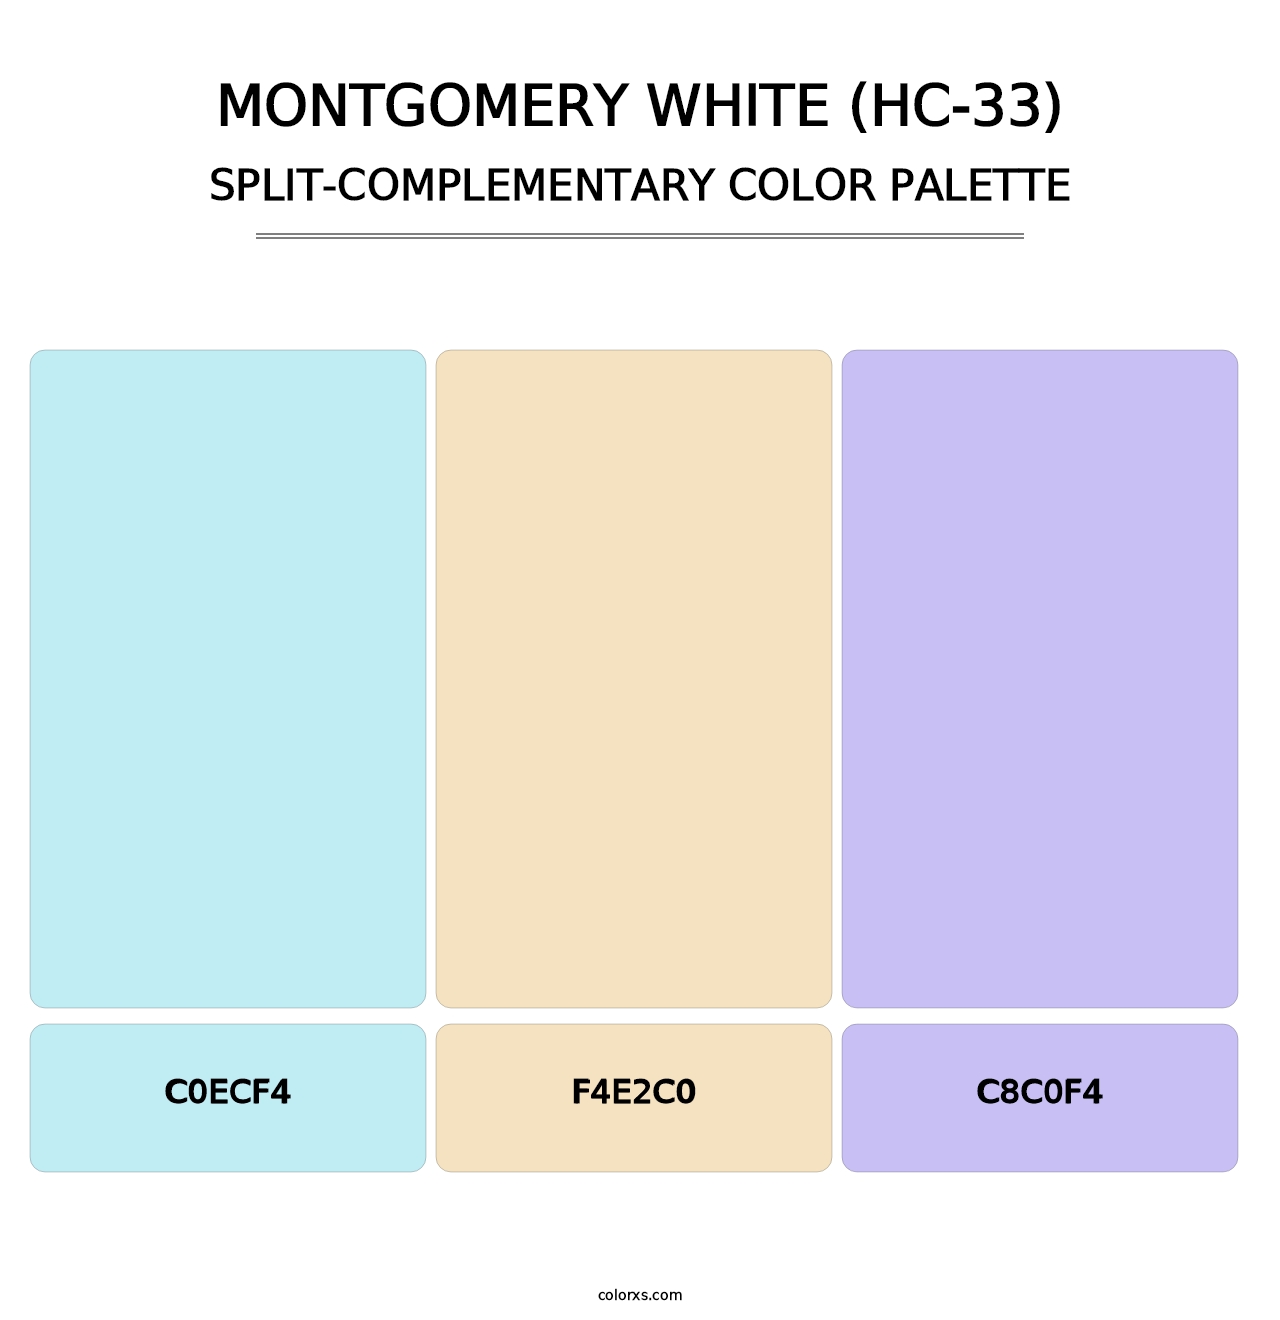 Montgomery White (HC-33) - Split-Complementary Color Palette